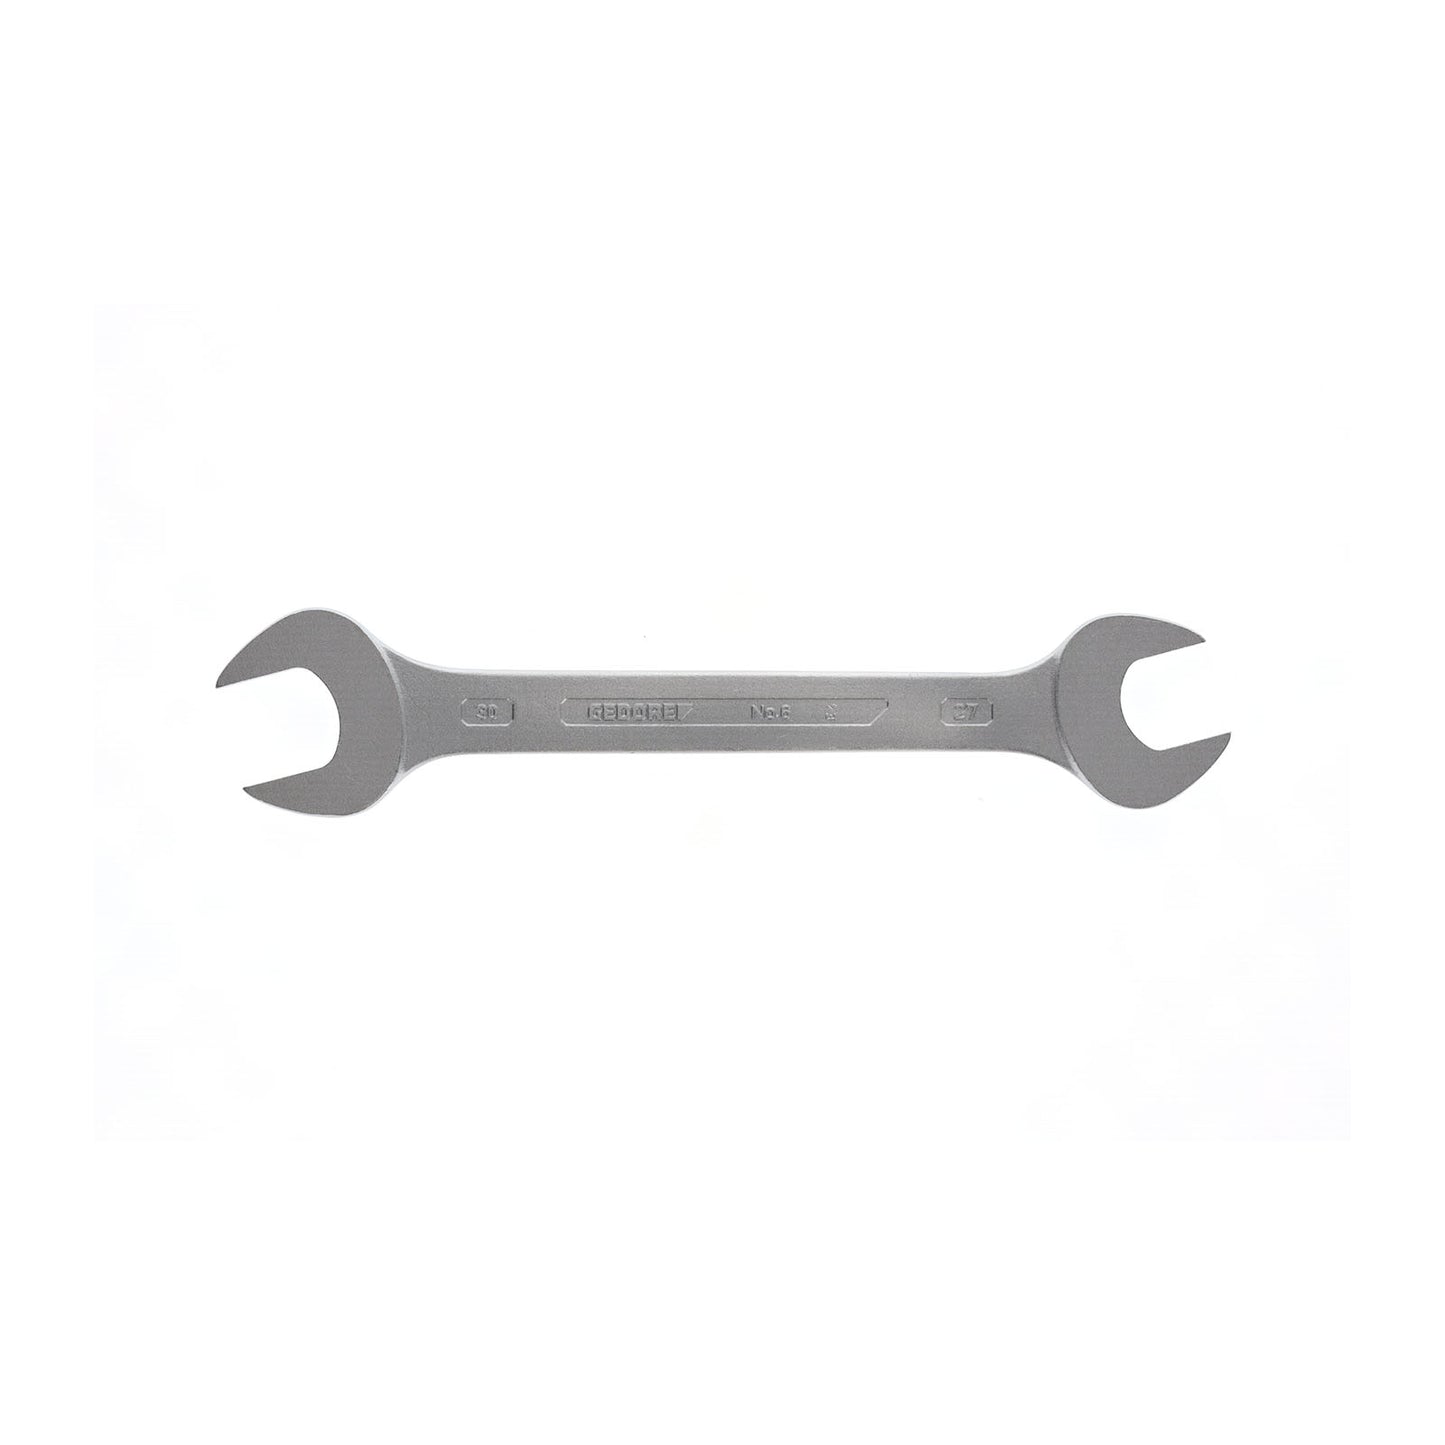 GEDORE 6 27X30 - 2-Mount Fixed Wrench, 27x30 (6067900)